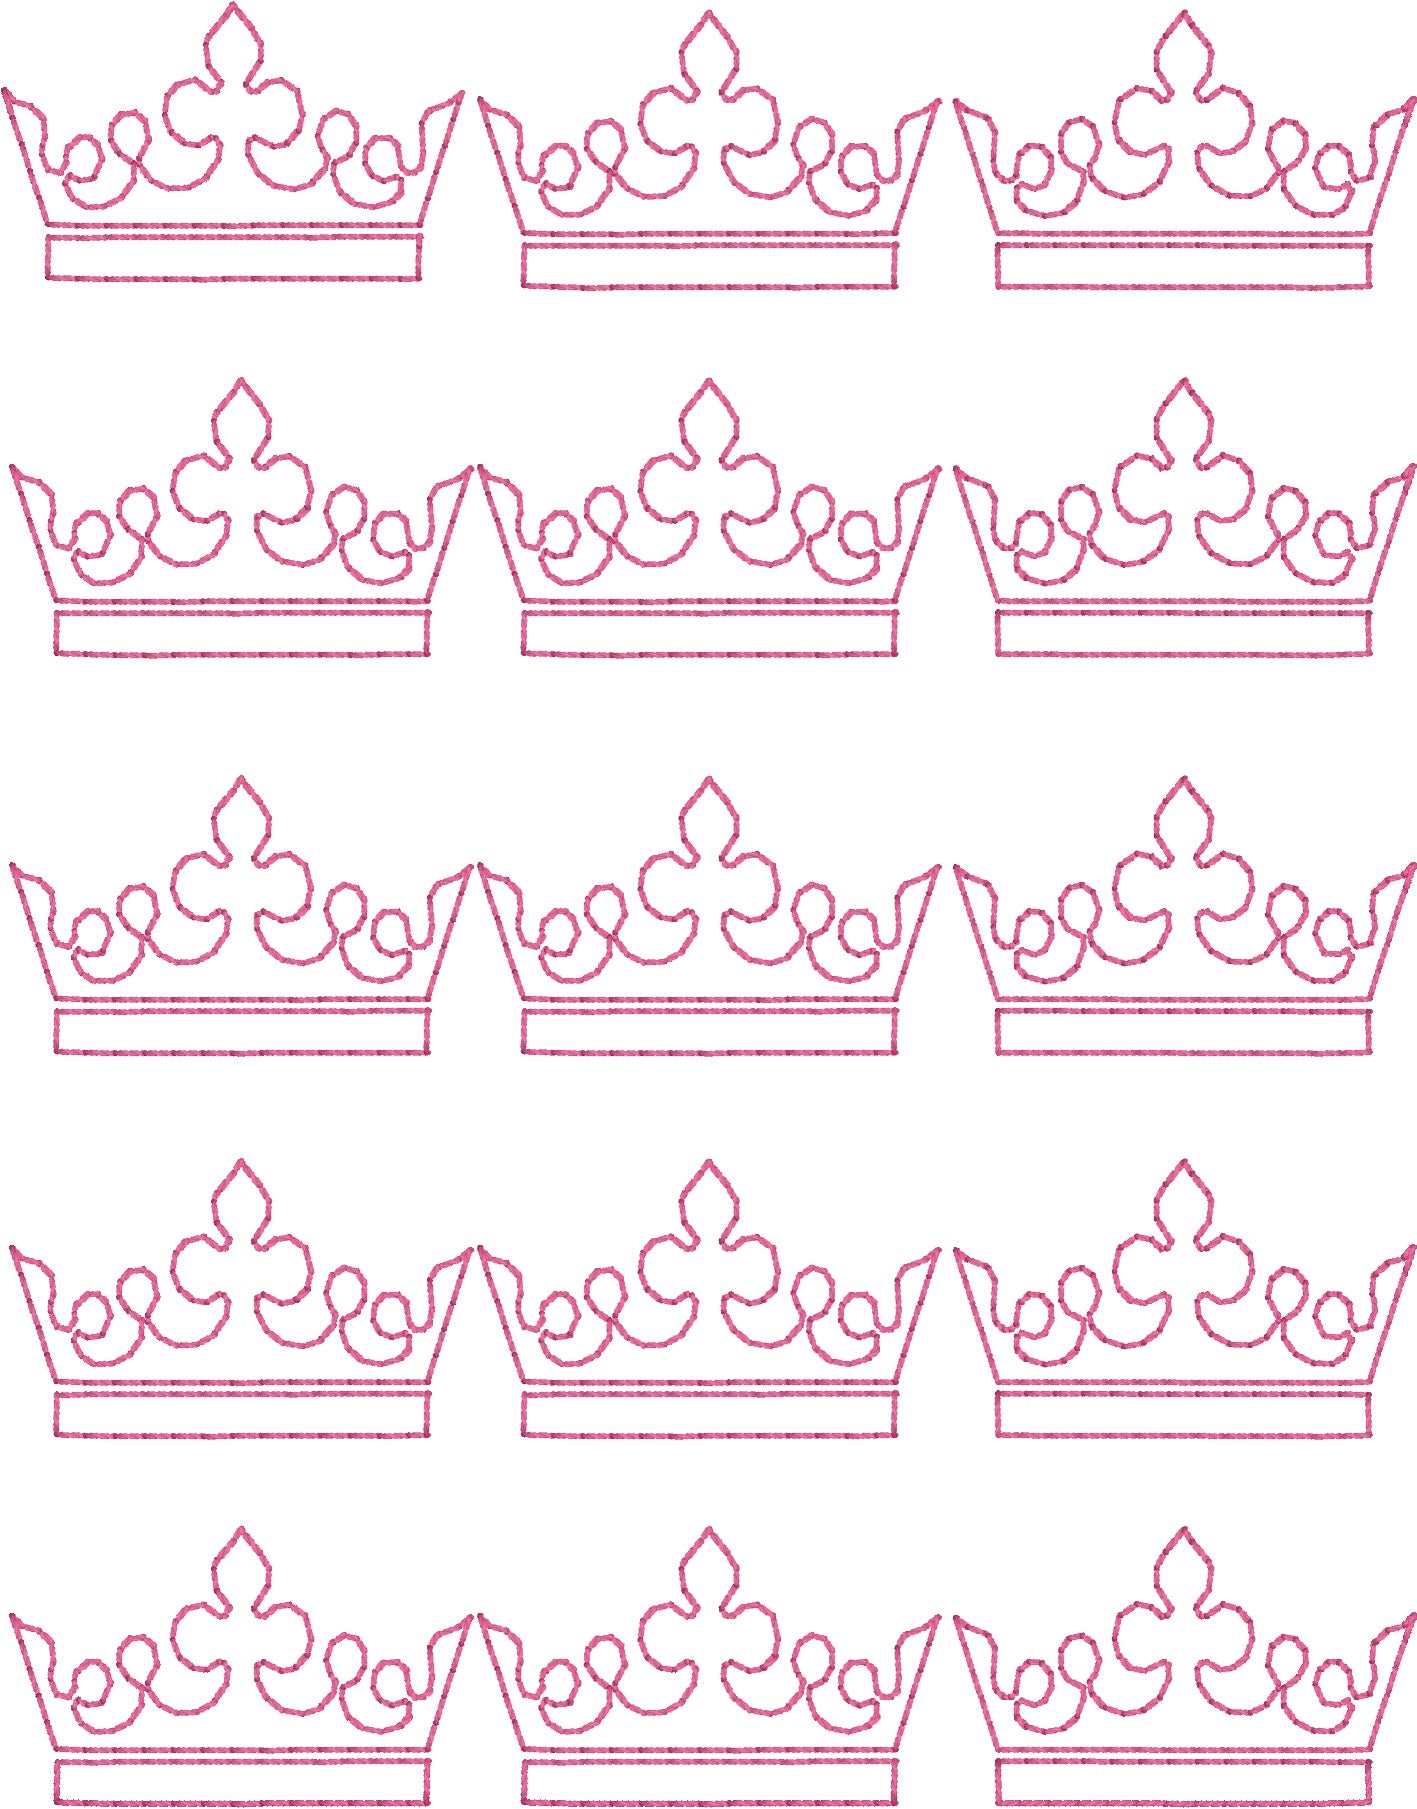 Princess Crowns Allover - Machine Embroidery Quilting Design - 5x7 Hoop - Beachside Knits N Quilts